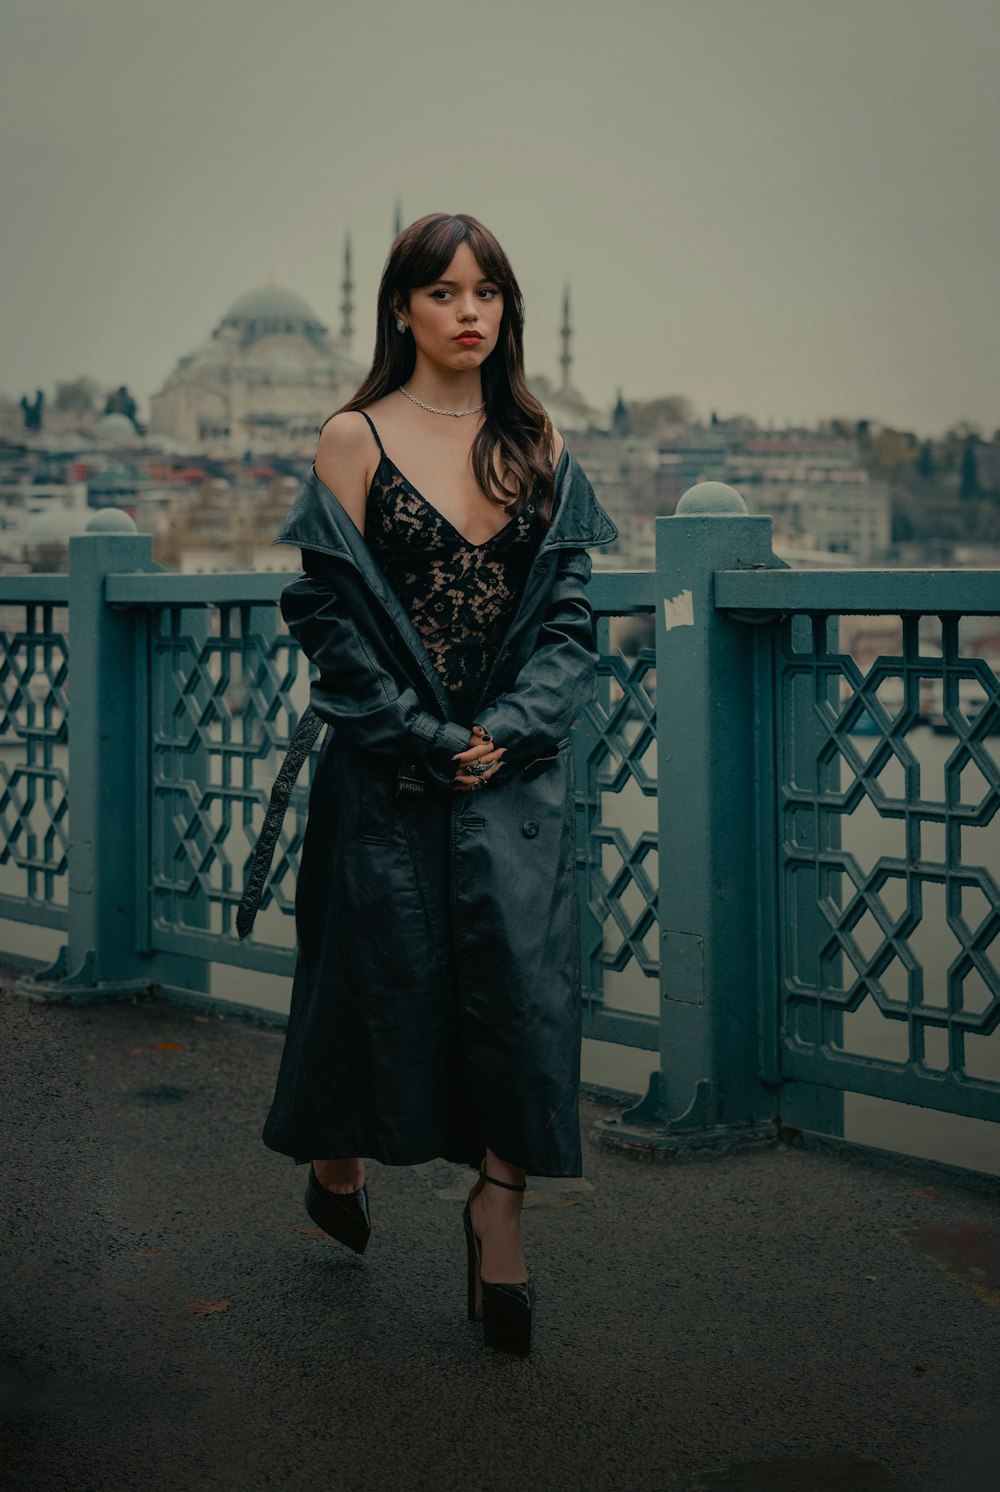 a woman standing on a bridge with a city in the background